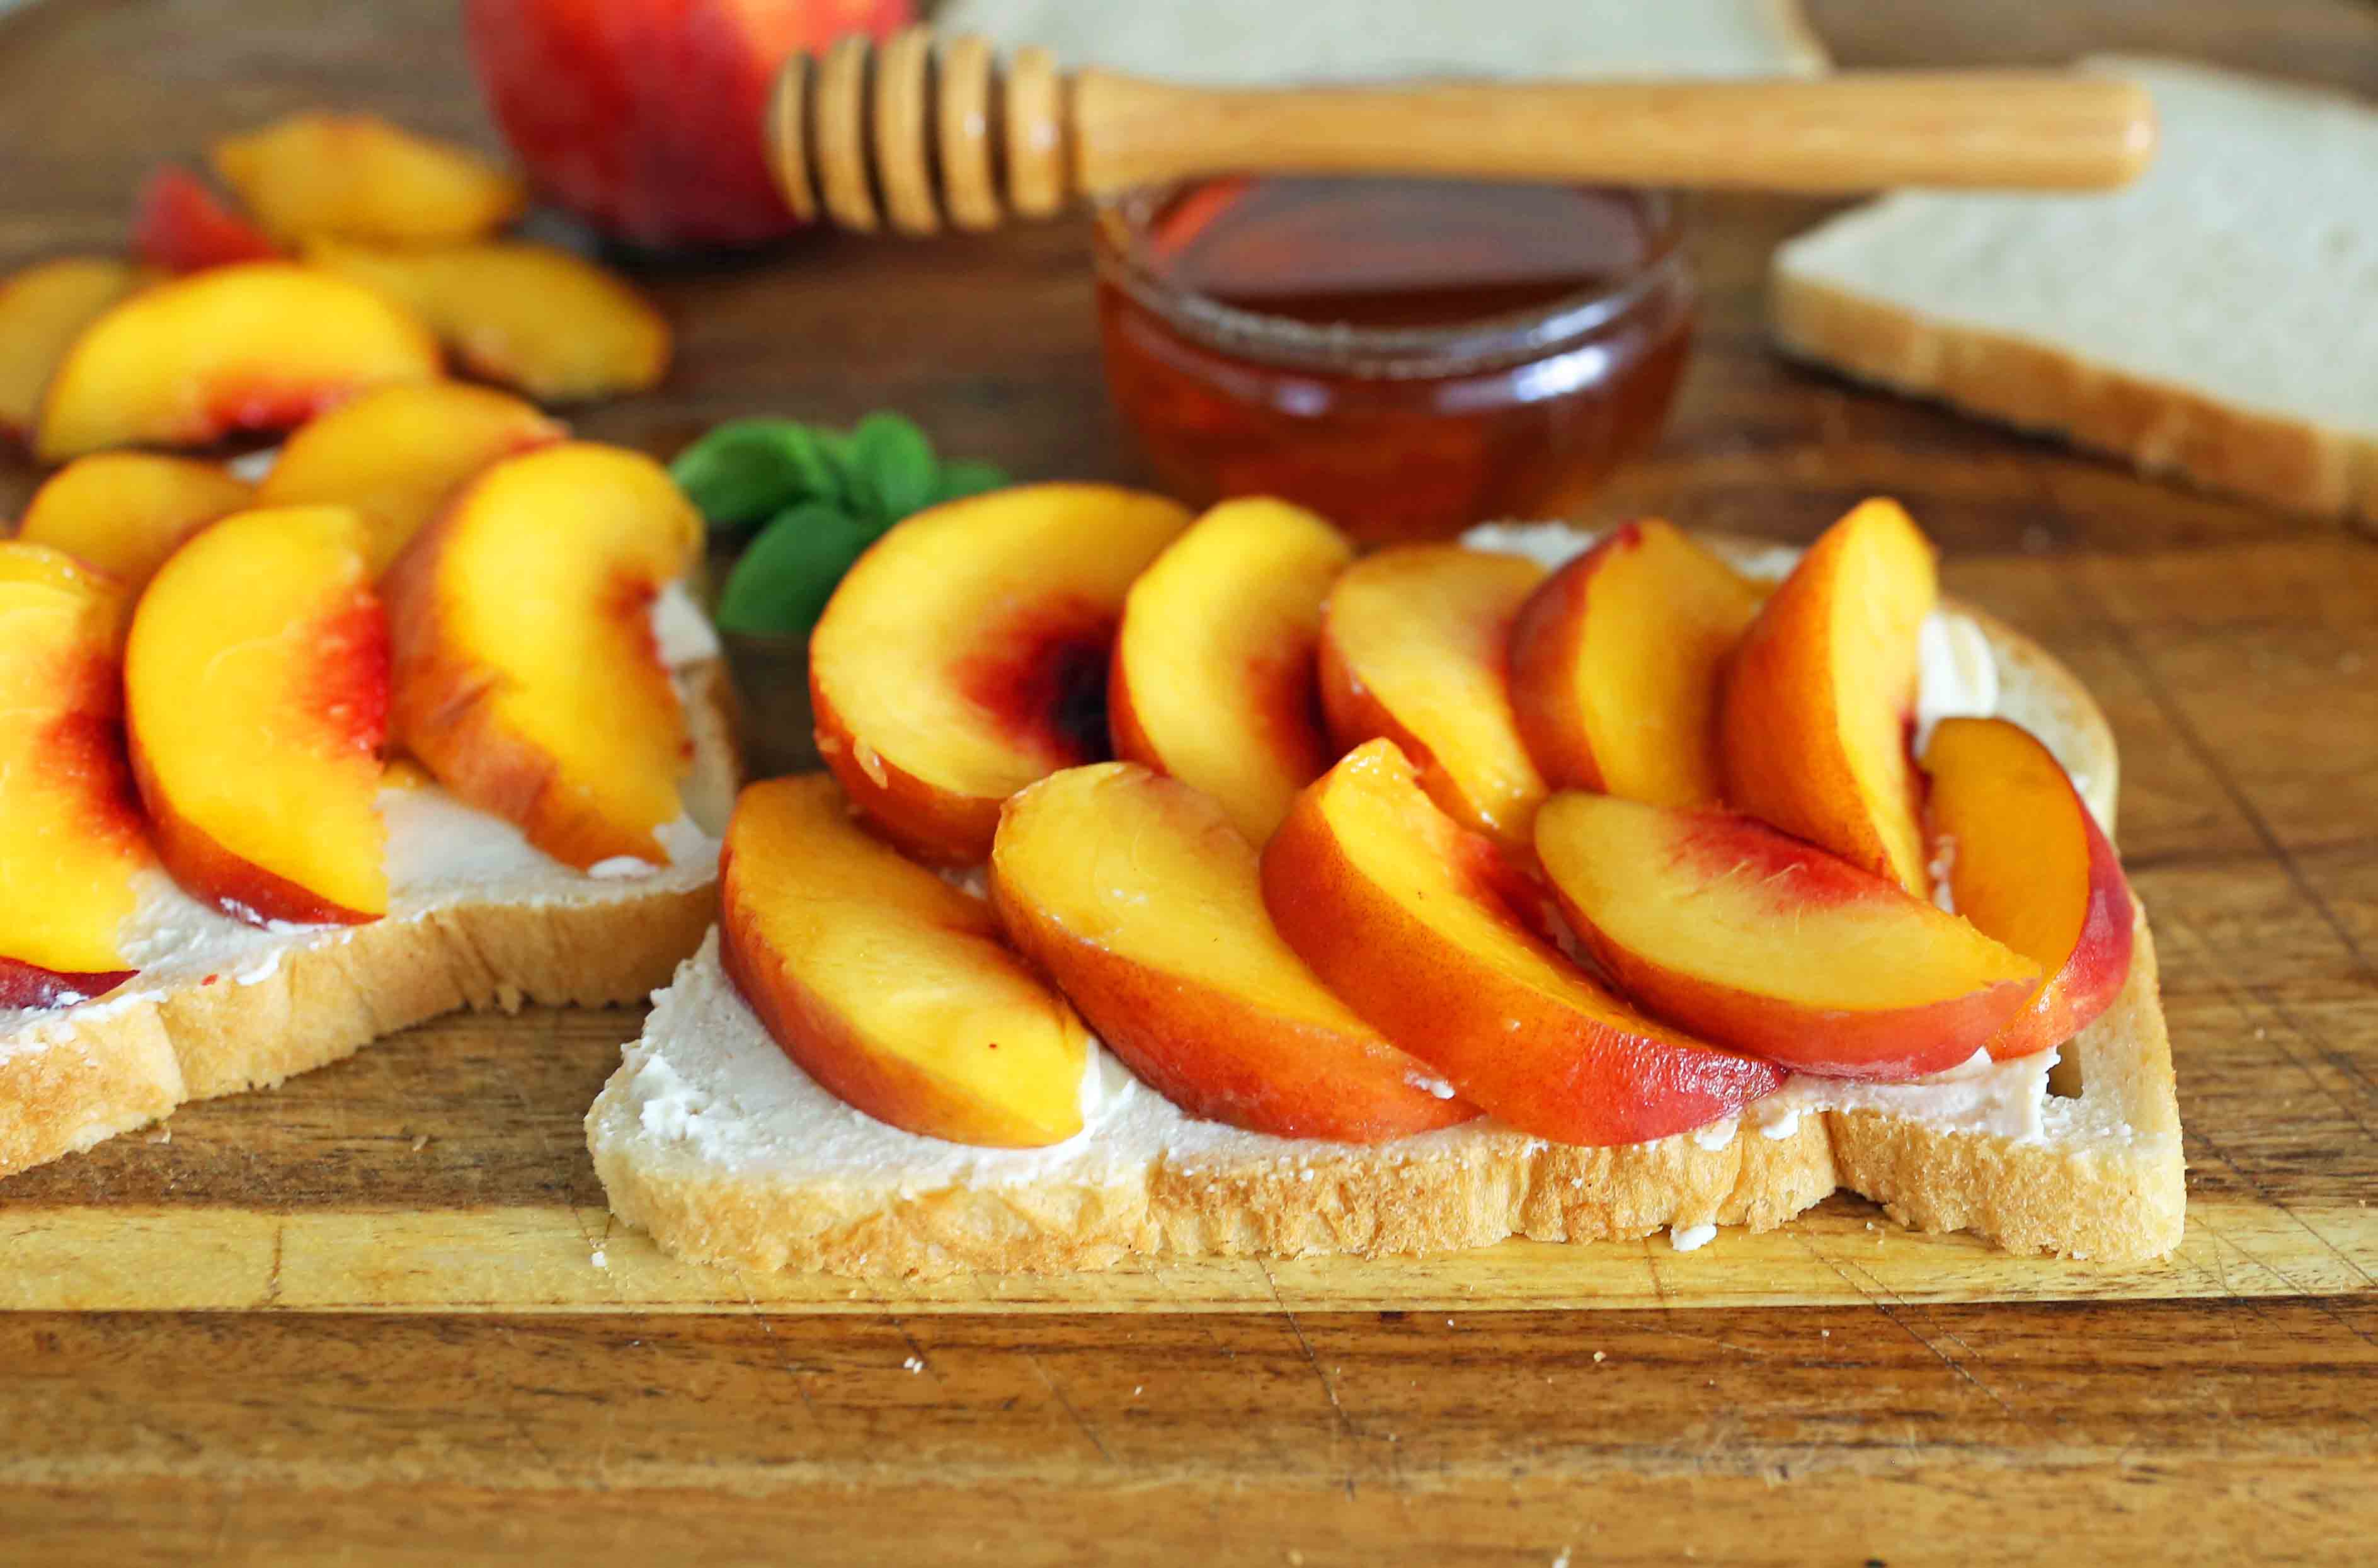 Honey Peach White Cheddar Grilled Cheese Sandwich. A summer grilled cheese sandwich with sweet juicy peaches, white cheddar cheese, a drizzle of honey on buttery toasted bread. www.modernhoney.com #peaches #grilledcheese #peachgrilledcheese 